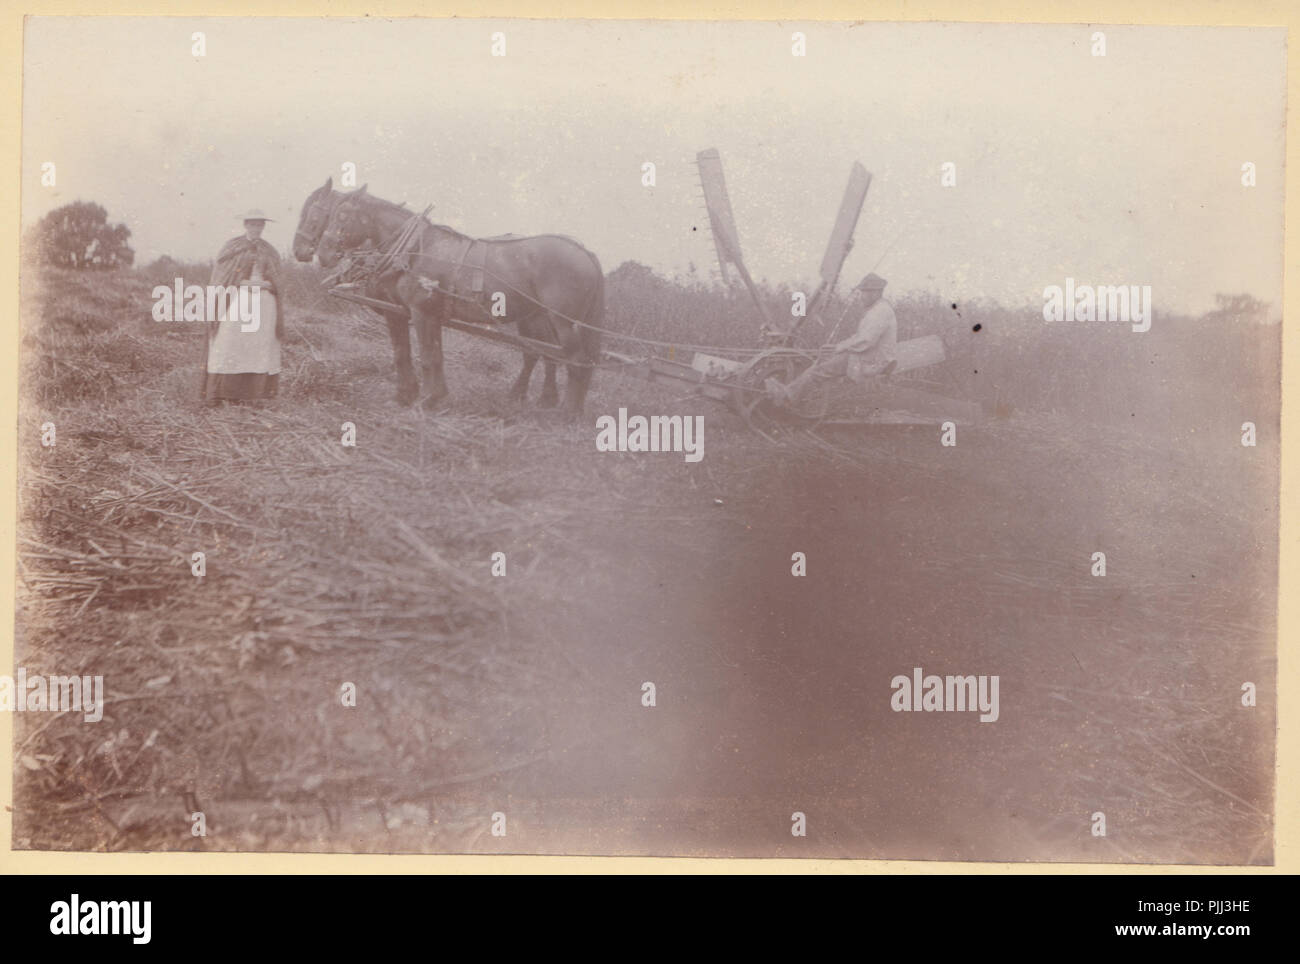 Victorian Cabinet Card of a Farming Scene. A Man Using Horse Pulled Farm Machinery Stock Photo